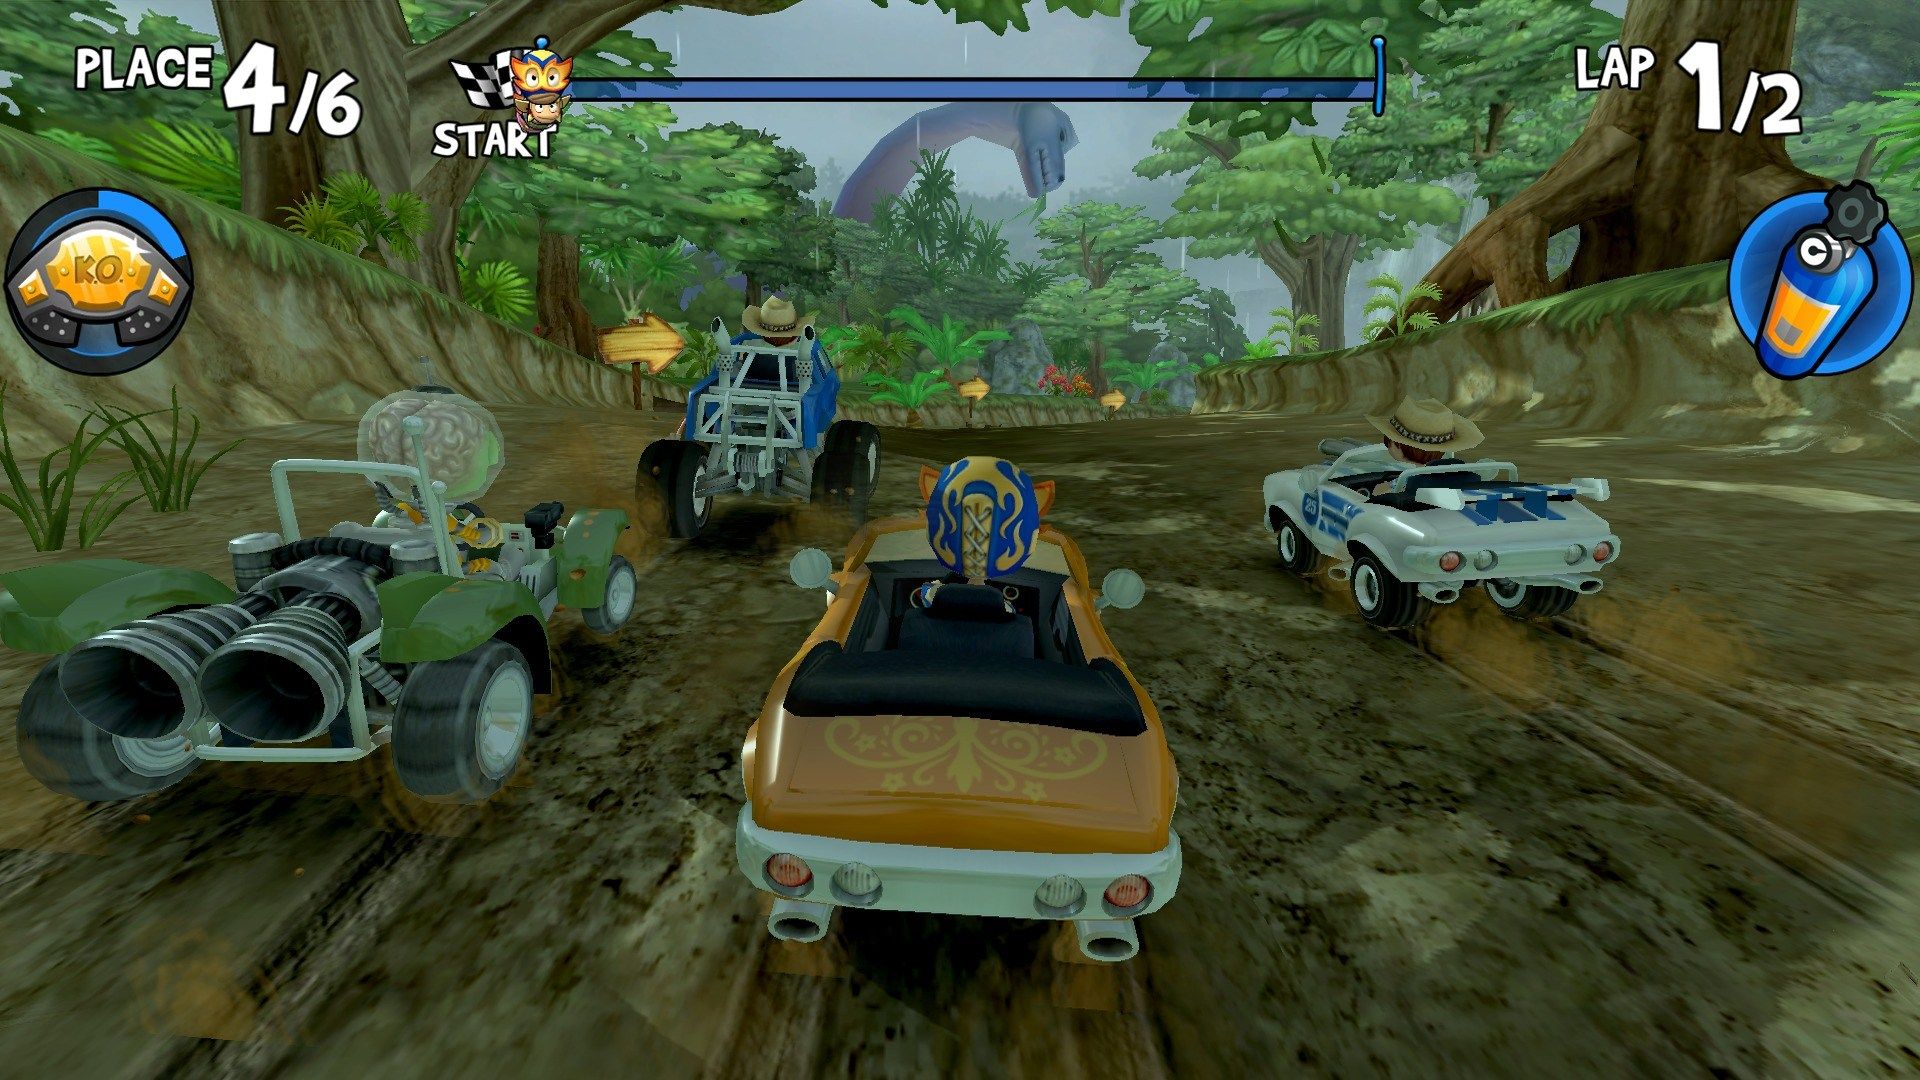 how to increase your money on beach buggy racing pc